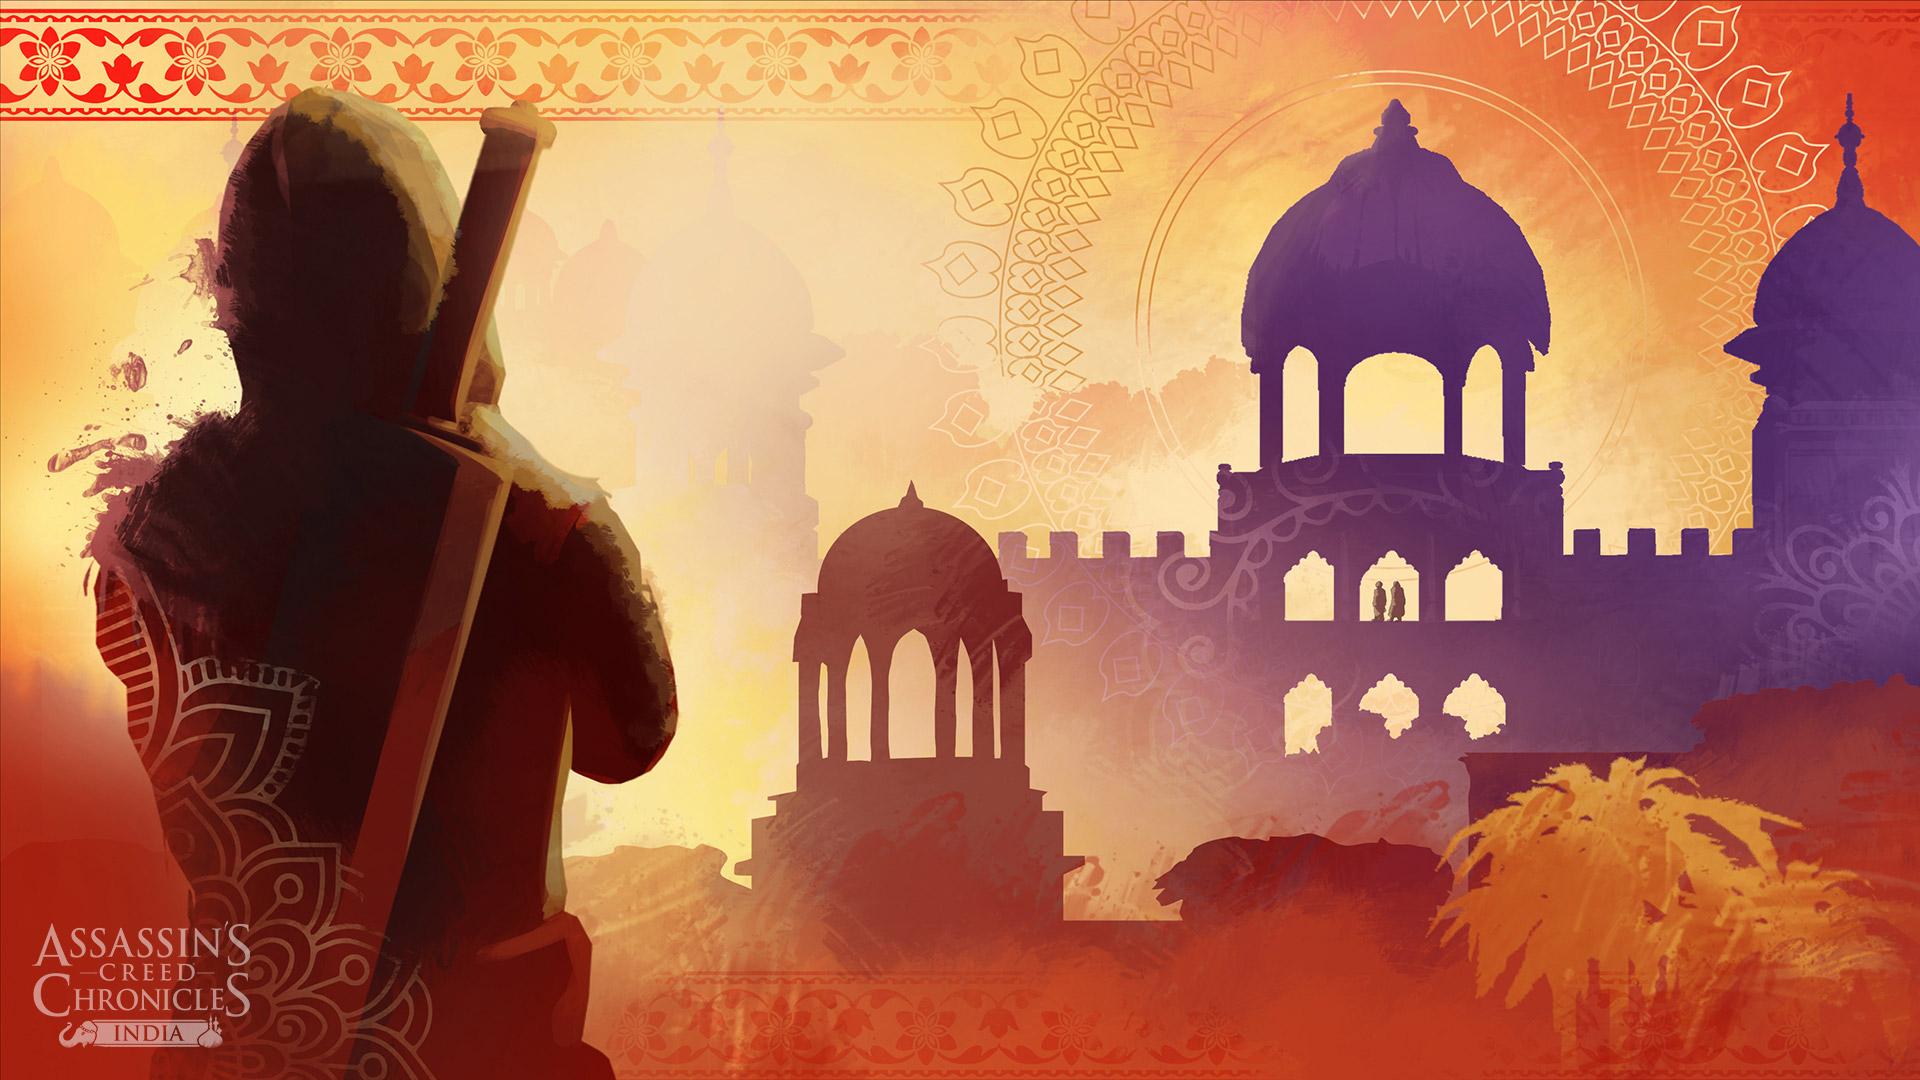 ASSASSIN’S CREED CHRONICLES INDIA